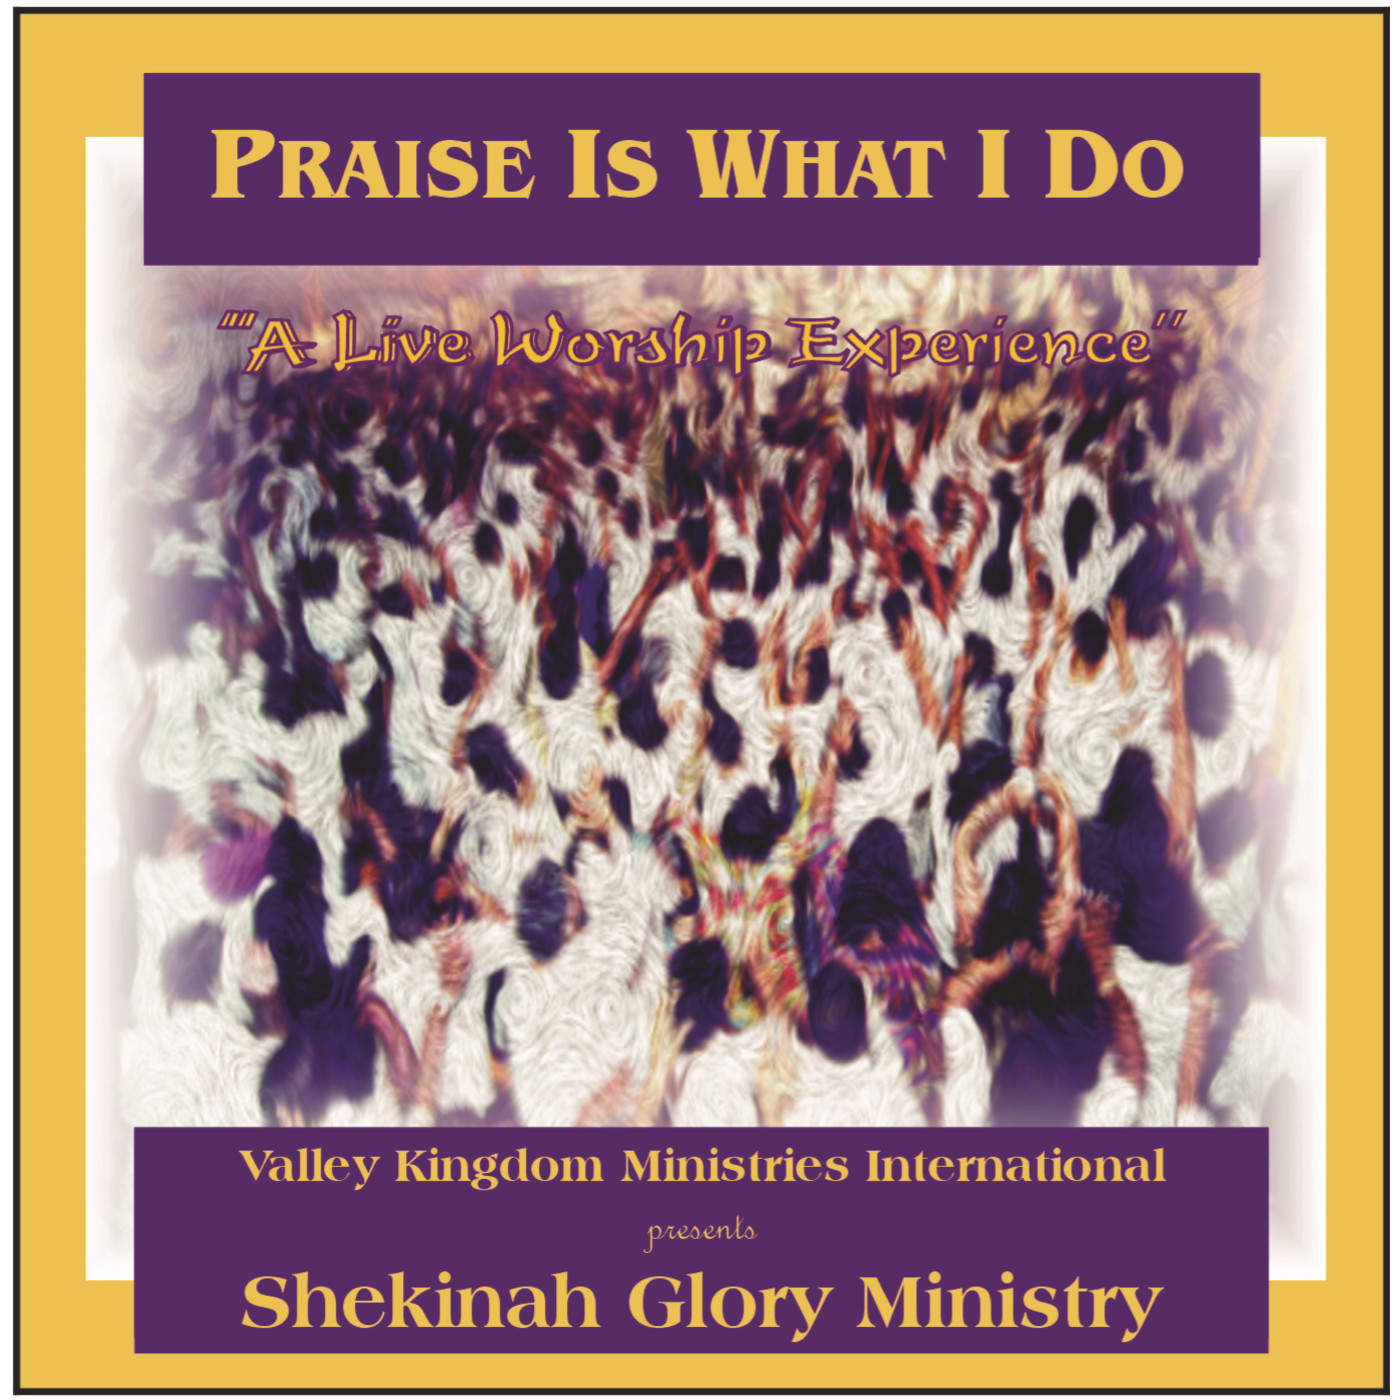 Art for Praise Is What I Do by Shekinah Glory Ministry